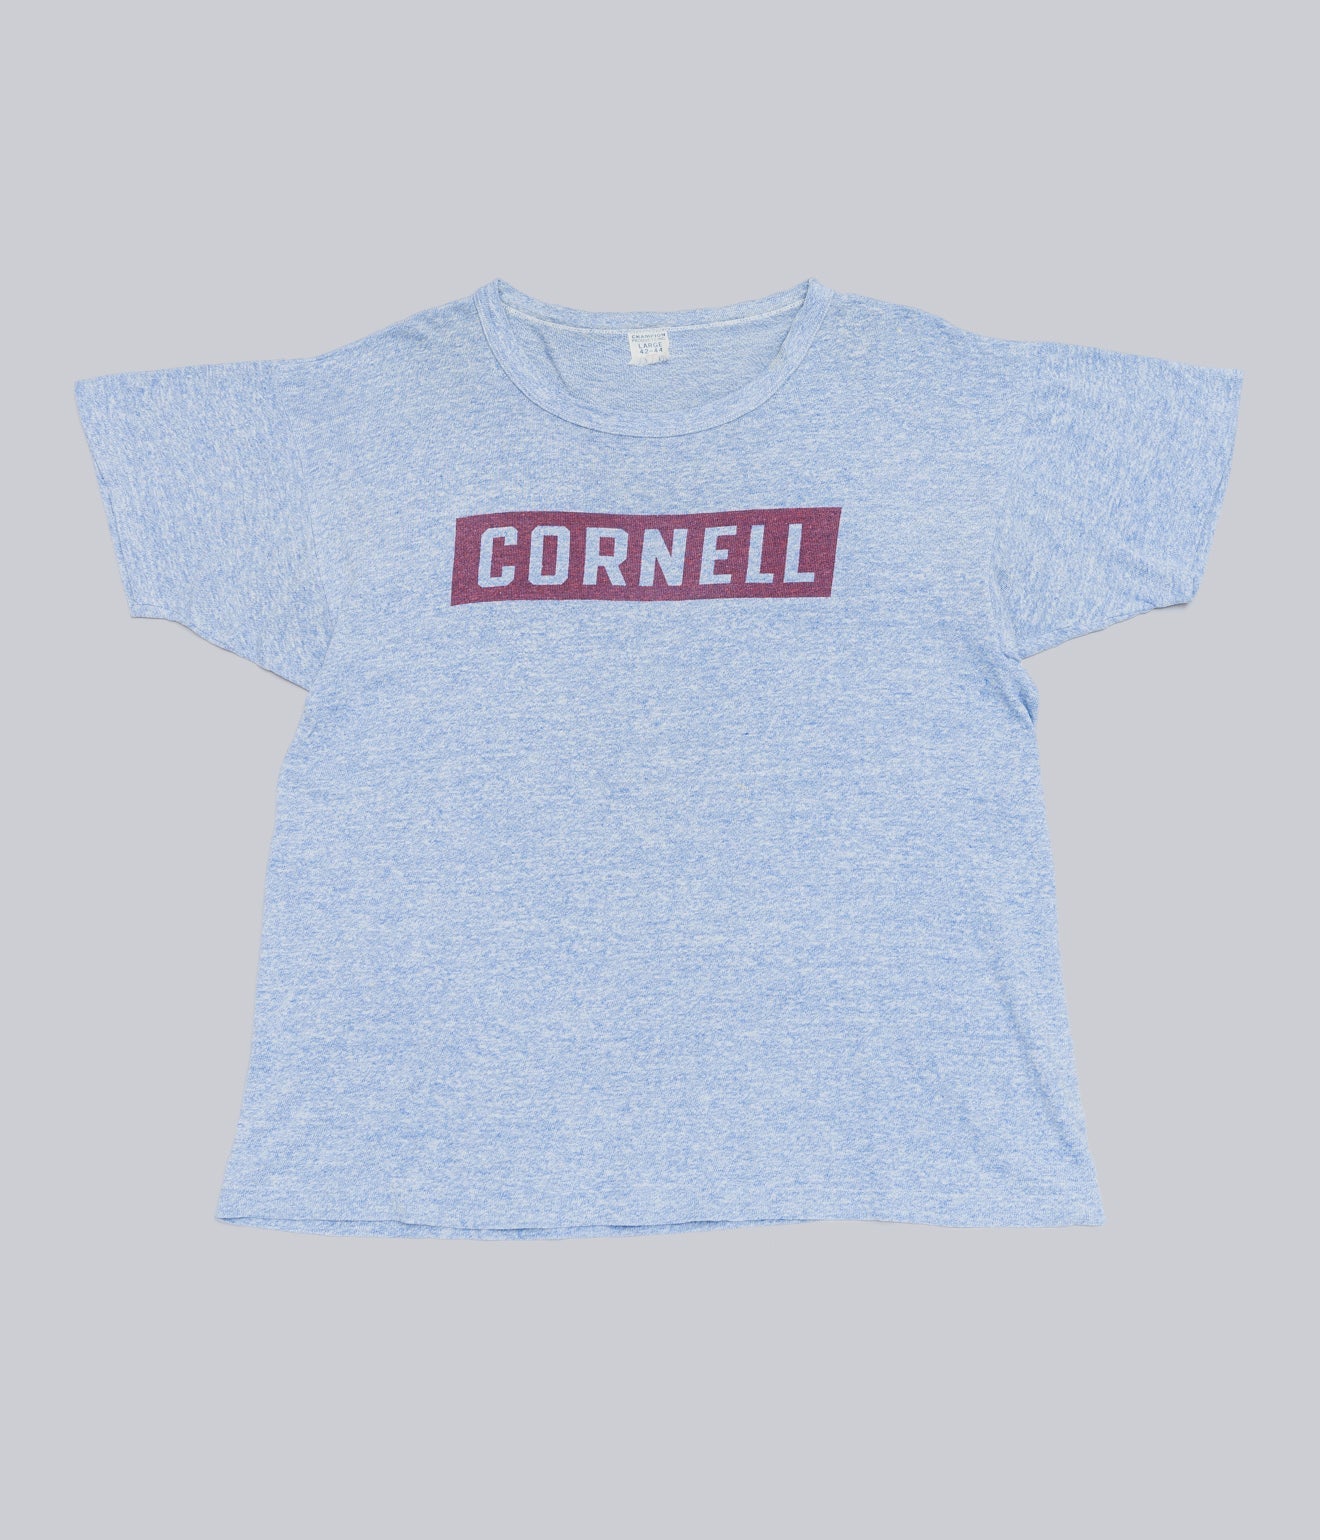 60's Champion PRODUCTS TAG "CORNELL" T-SHIRT - WEAREALLANIMALS